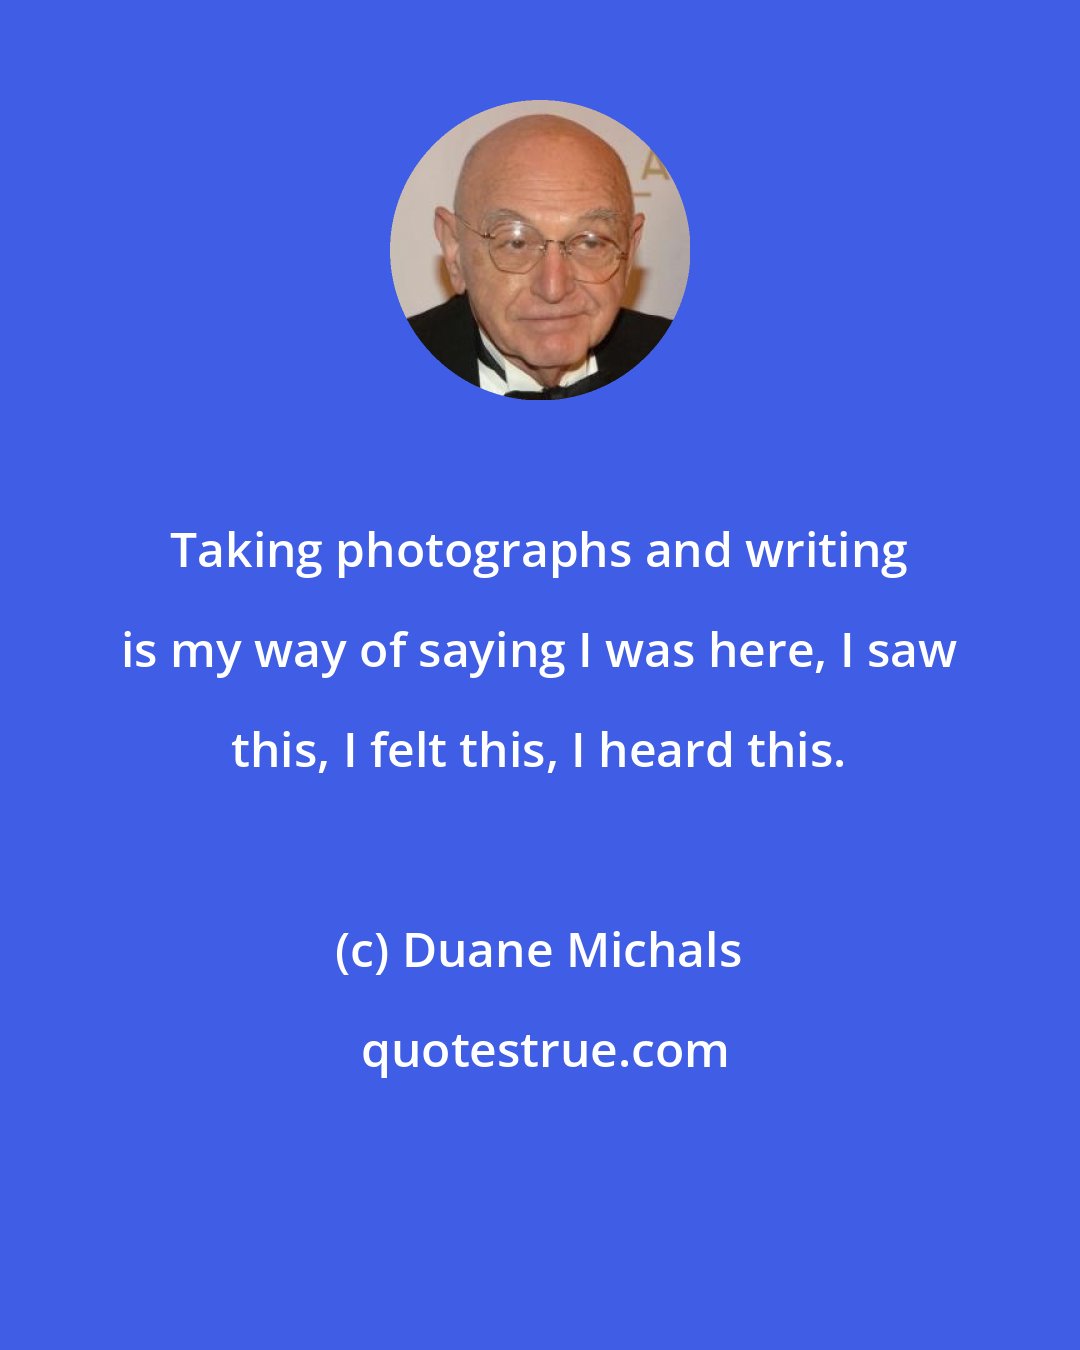 Duane Michals: Taking photographs and writing is my way of saying I was here, I saw this, I felt this, I heard this.